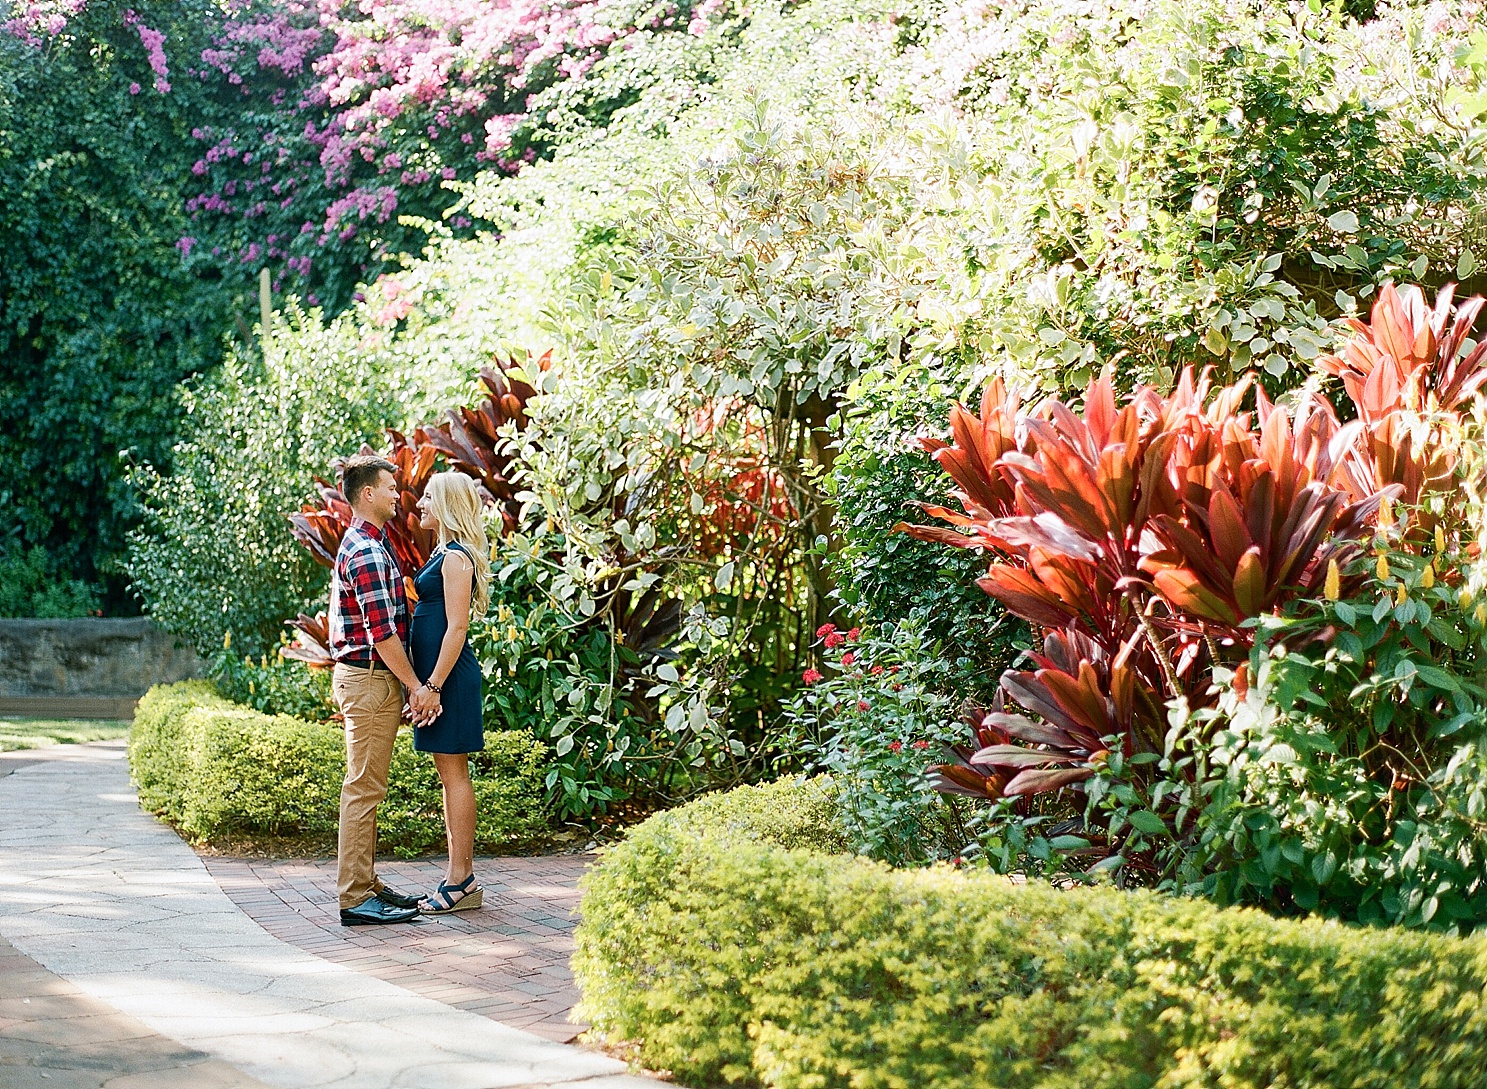 Amy And Tyler An Engagement Session At Sunken Gardens In St